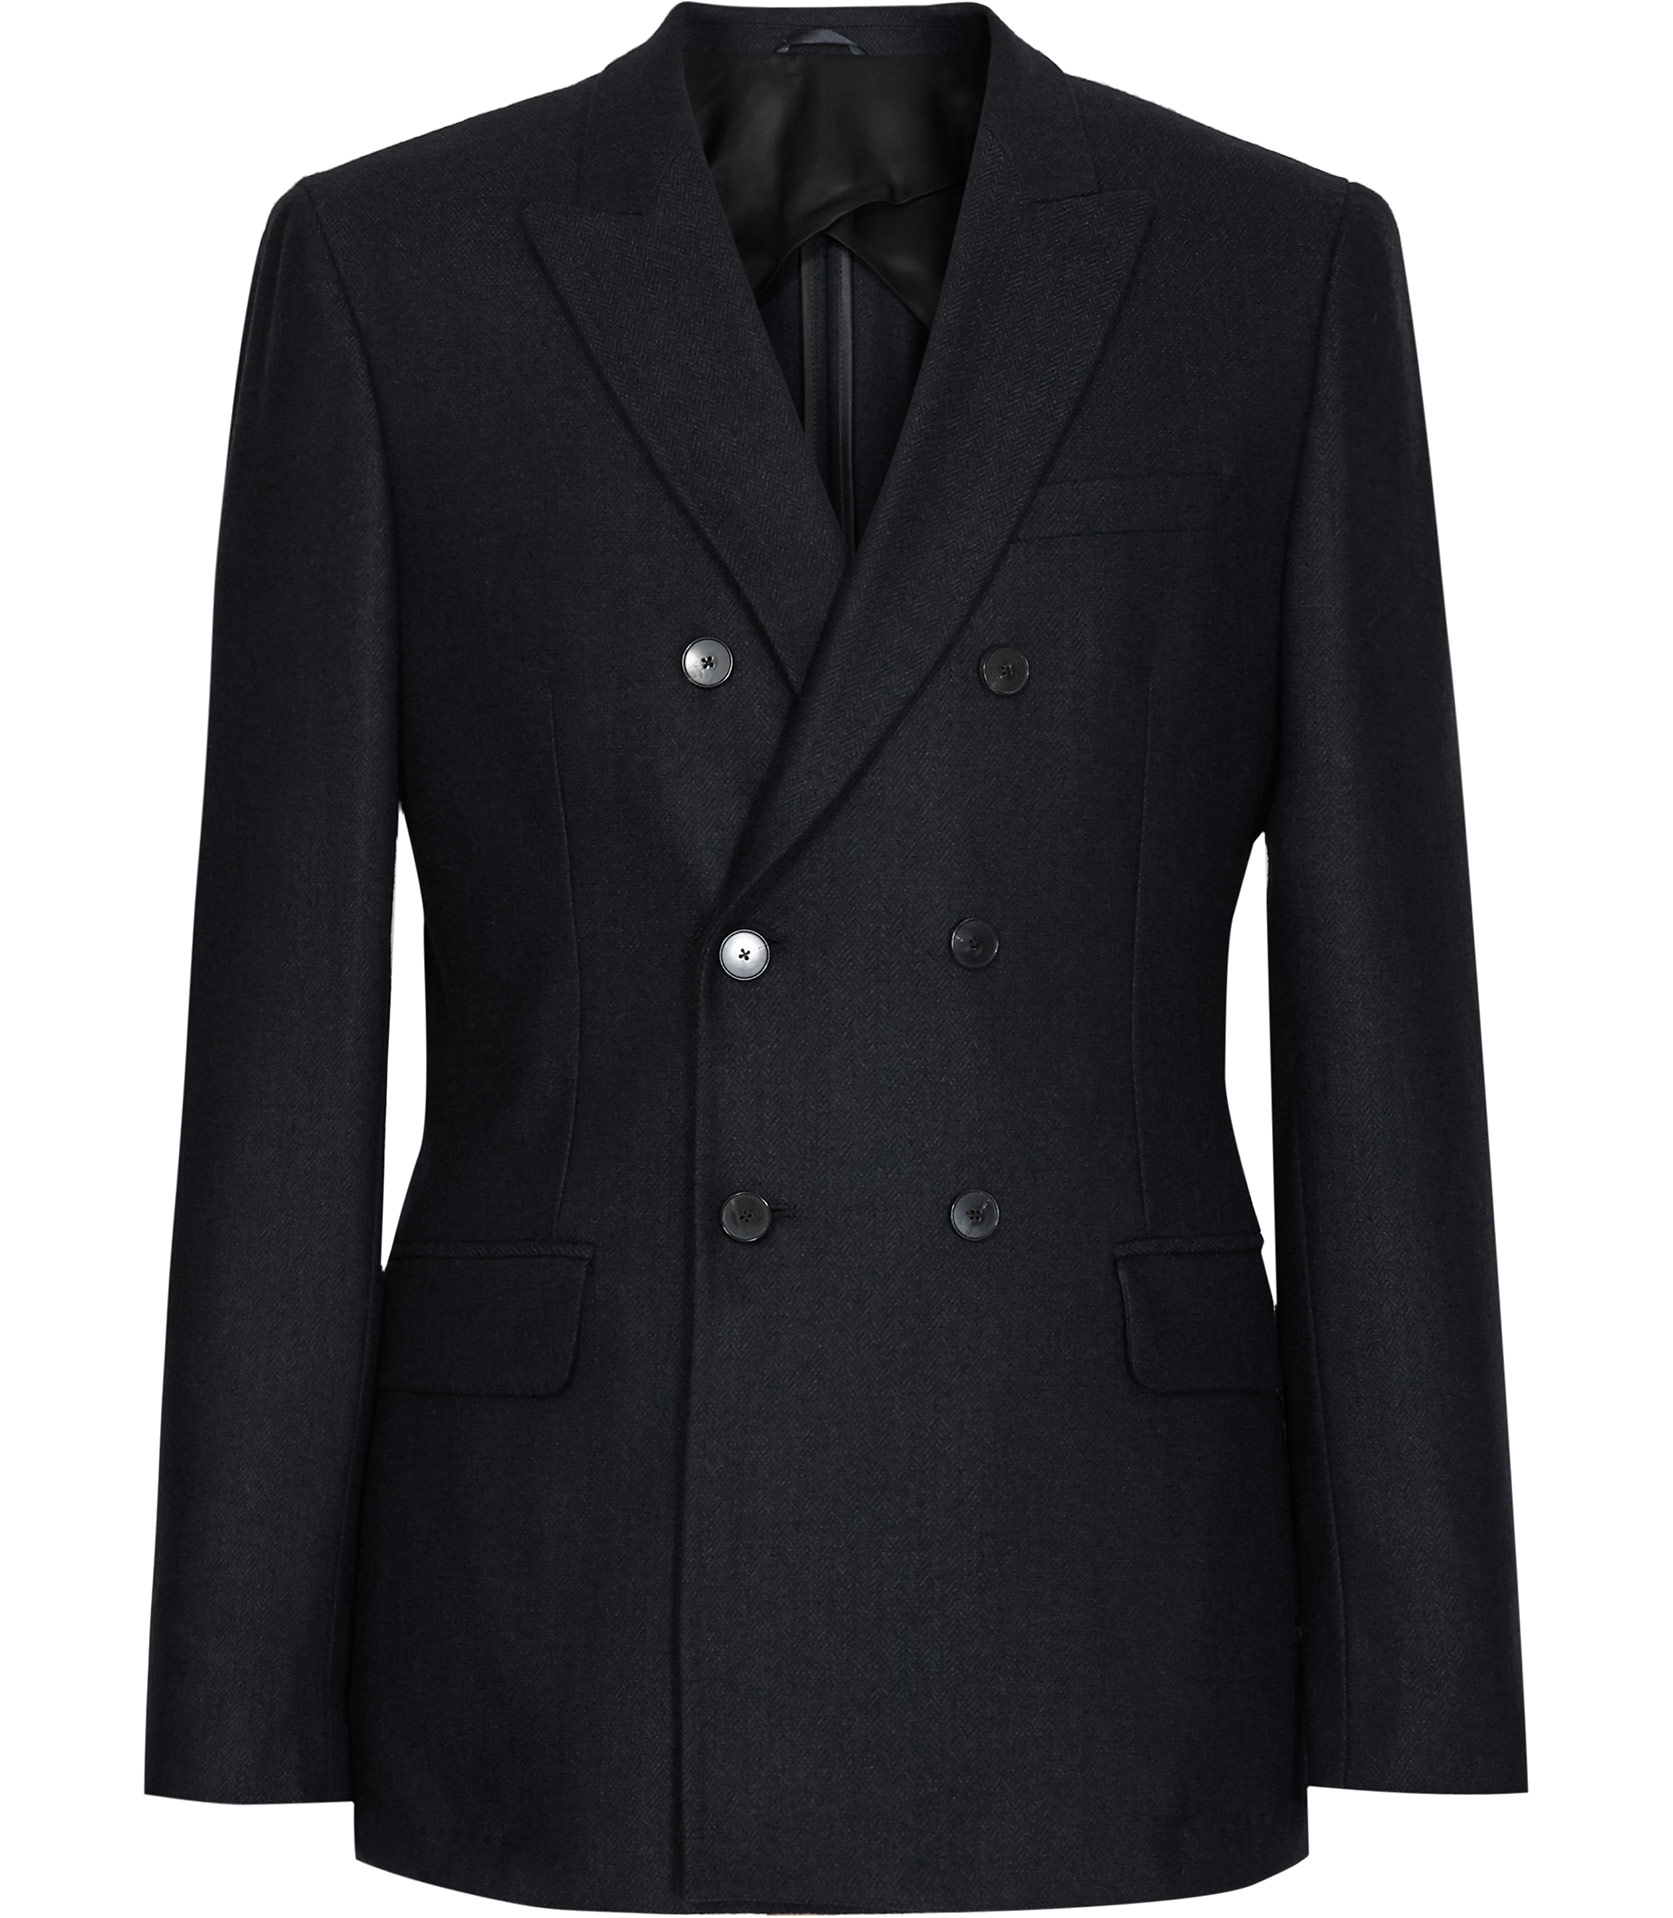 Reiss Corduroy East Double-breasted Blazer in Navy (Blue) for Men - Lyst